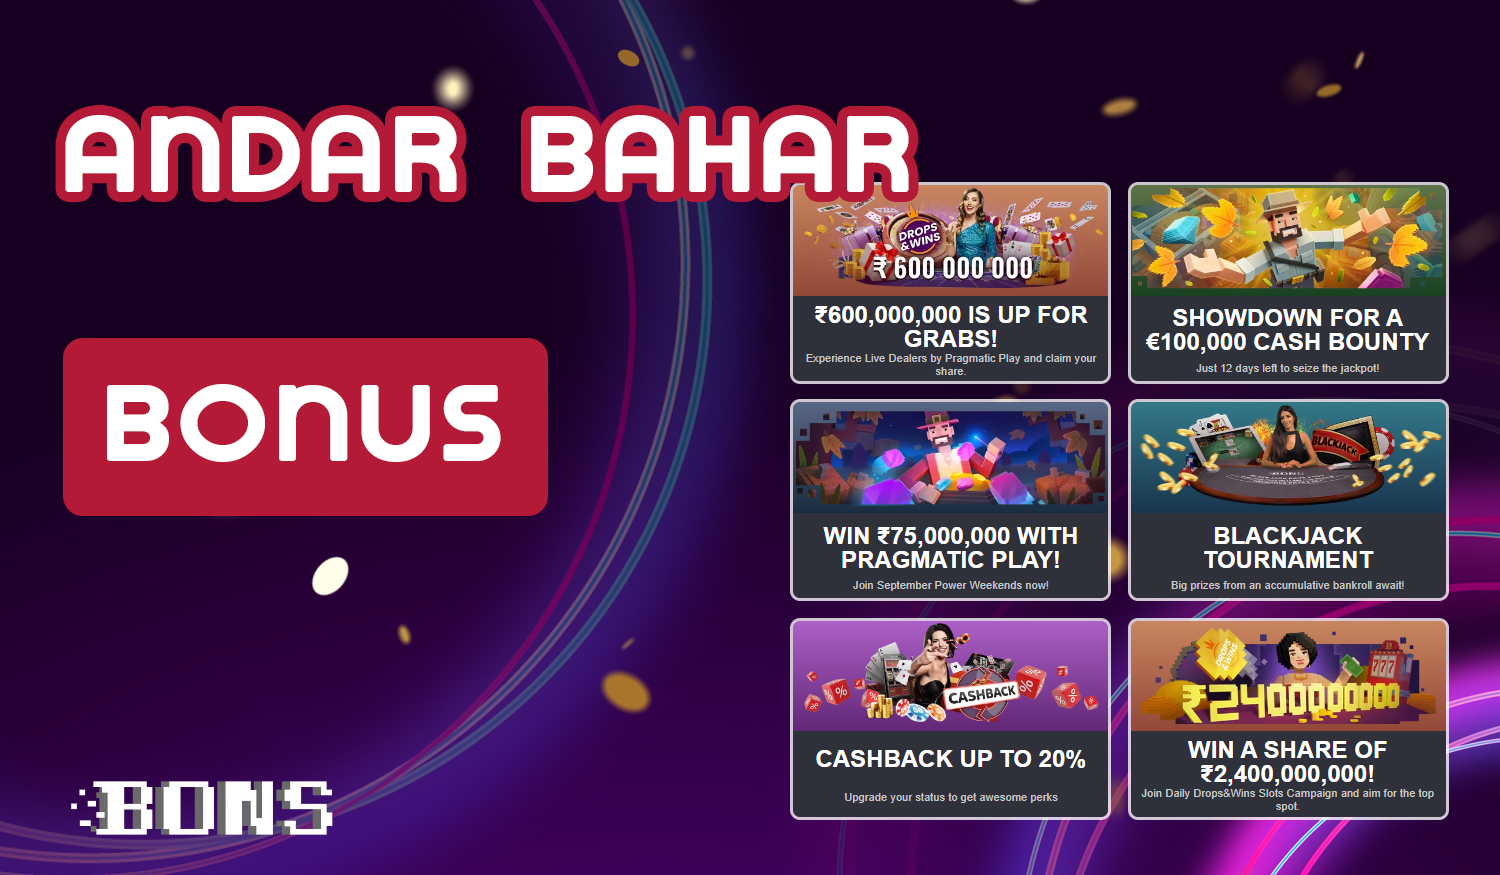 List of bonuses available at Bons online casino site for Andar Bahar players